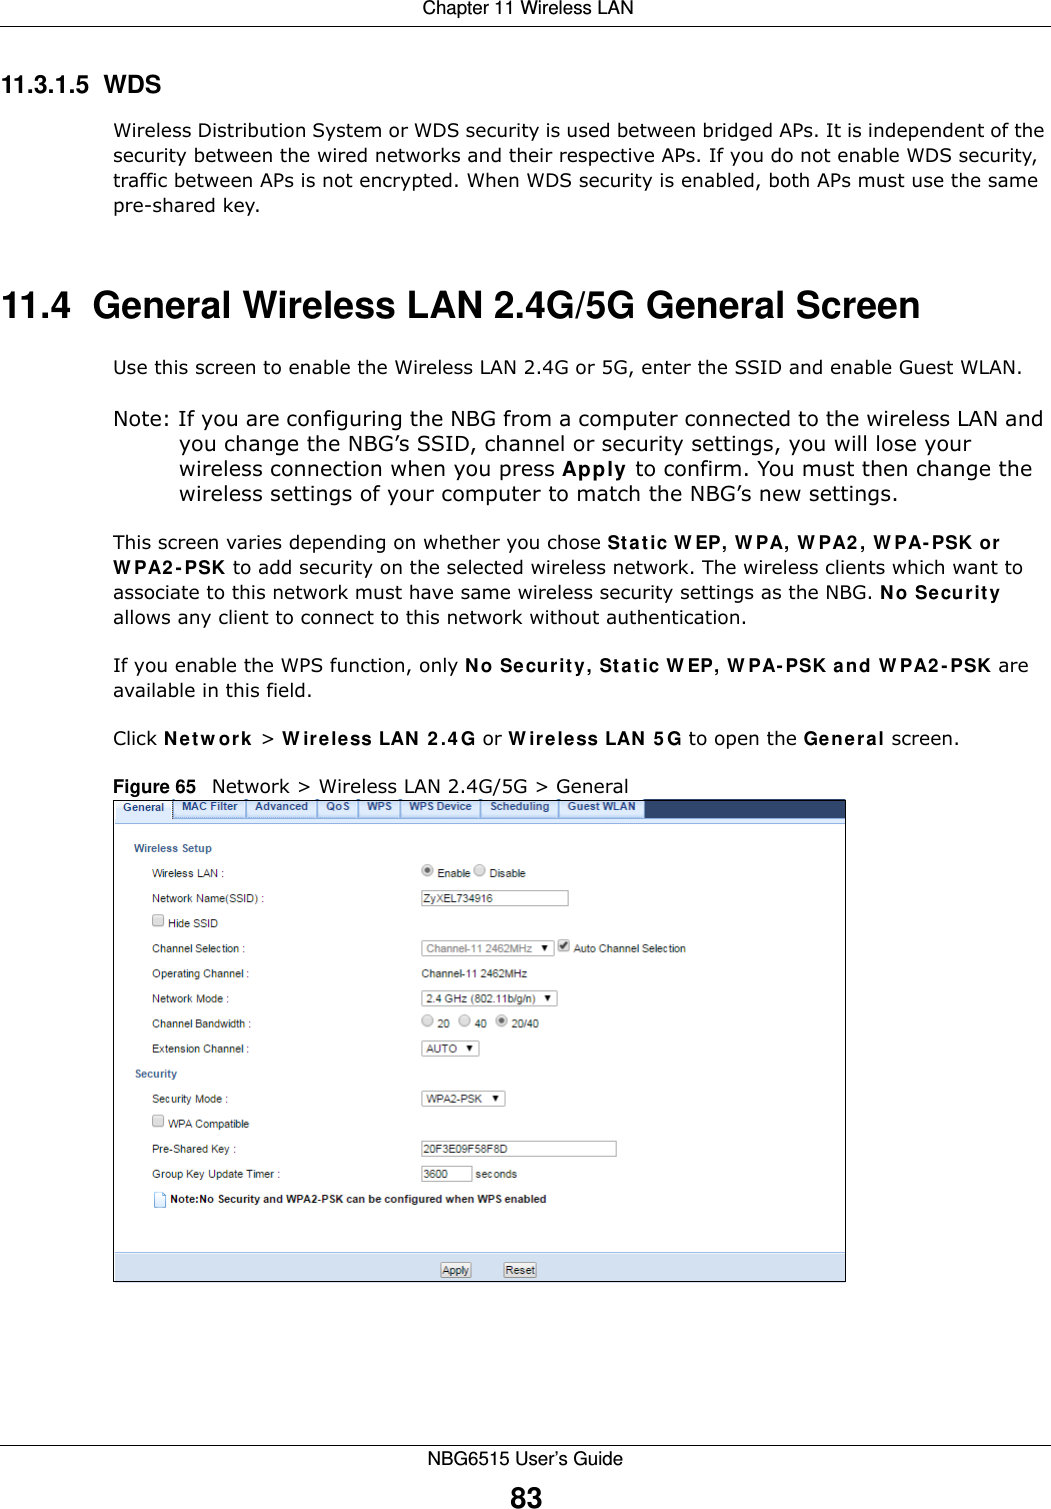  Chapter 11 Wireless LANNBG6515 User’s Guide8311.3.1.5  WDSWireless Distribution System or WDS security is used between bridged APs. It is independent of the security between the wired networks and their respective APs. If you do not enable WDS security, traffic between APs is not encrypted. When WDS security is enabled, both APs must use the same pre-shared key.11.4  General Wireless LAN 2.4G/5G General Screen Use this screen to enable the Wireless LAN 2.4G or 5G, enter the SSID and enable Guest WLAN.Note: If you are configuring the NBG from a computer connected to the wireless LAN and you change the NBG’s SSID, channel or security settings, you will lose your wireless connection when you press Apply to confirm. You must then change the wireless settings of your computer to match the NBG’s new settings.This screen varies depending on whether you chose Static WEP, WPA, WPA2, WPA-PSK or WPA2-PSK to add security on the selected wireless network. The wireless clients which want to associate to this network must have same wireless security settings as the NBG. No Security allows any client to connect to this network without authentication.If you enable the WPS function, only No Security, Static WEP, WPA-PSK and WPA2-PSK are available in this field.Click Network &gt; Wireless LAN 2.4G or Wireless LAN 5G to open the General screen.Figure 65   Network &gt; Wireless LAN 2.4G/5G &gt; General 